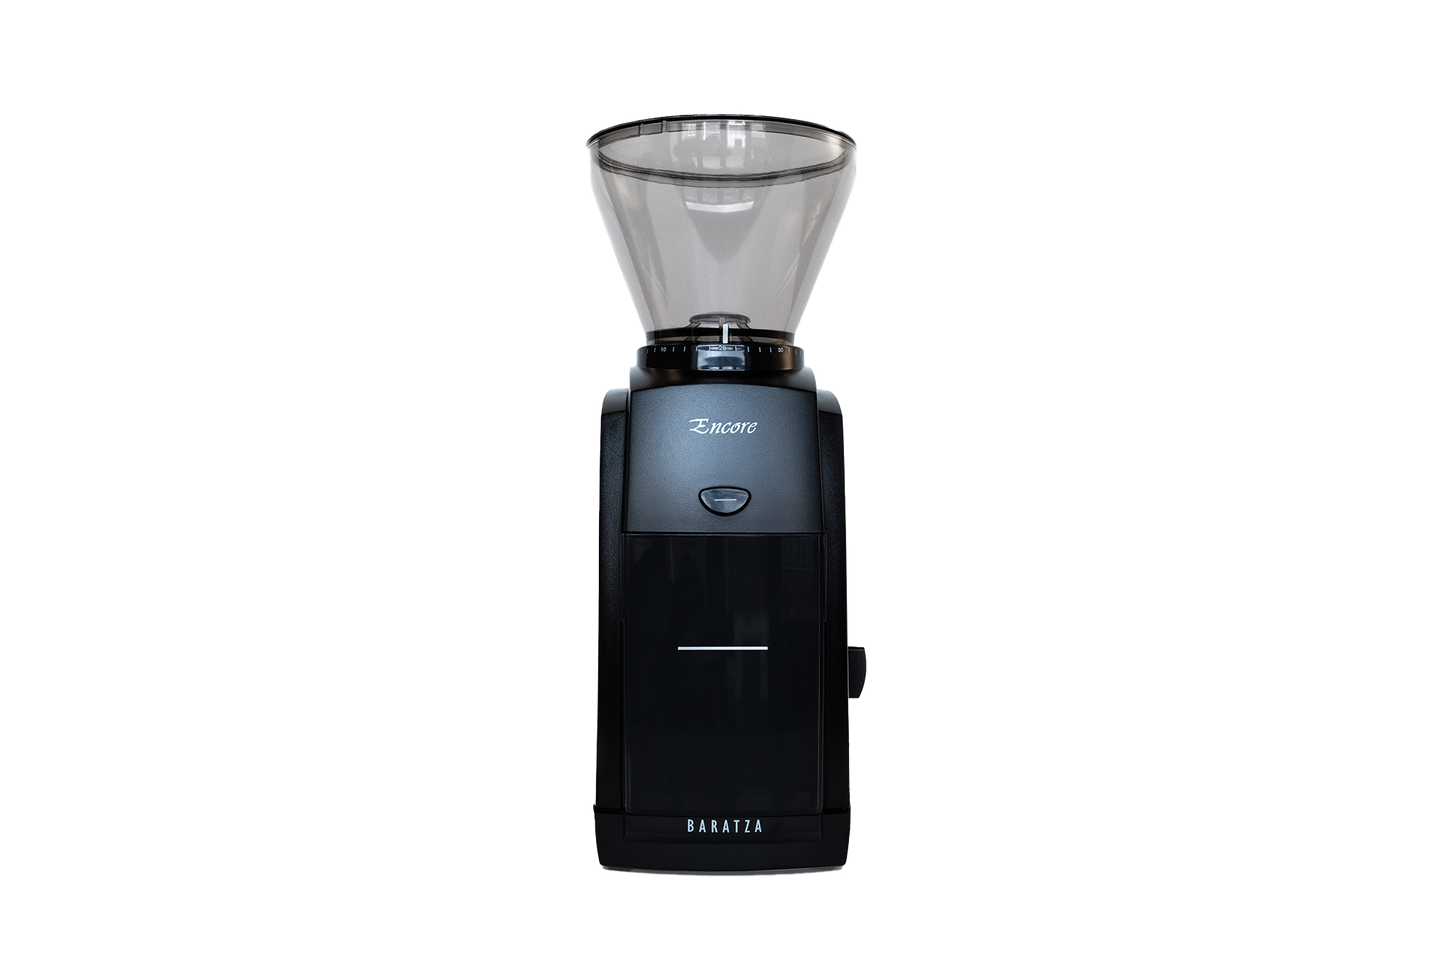 Reliable, robust & with a compact footprint, the Baratza Encore has long been the go-to grinder for those looking to improve their filter brewing experience.